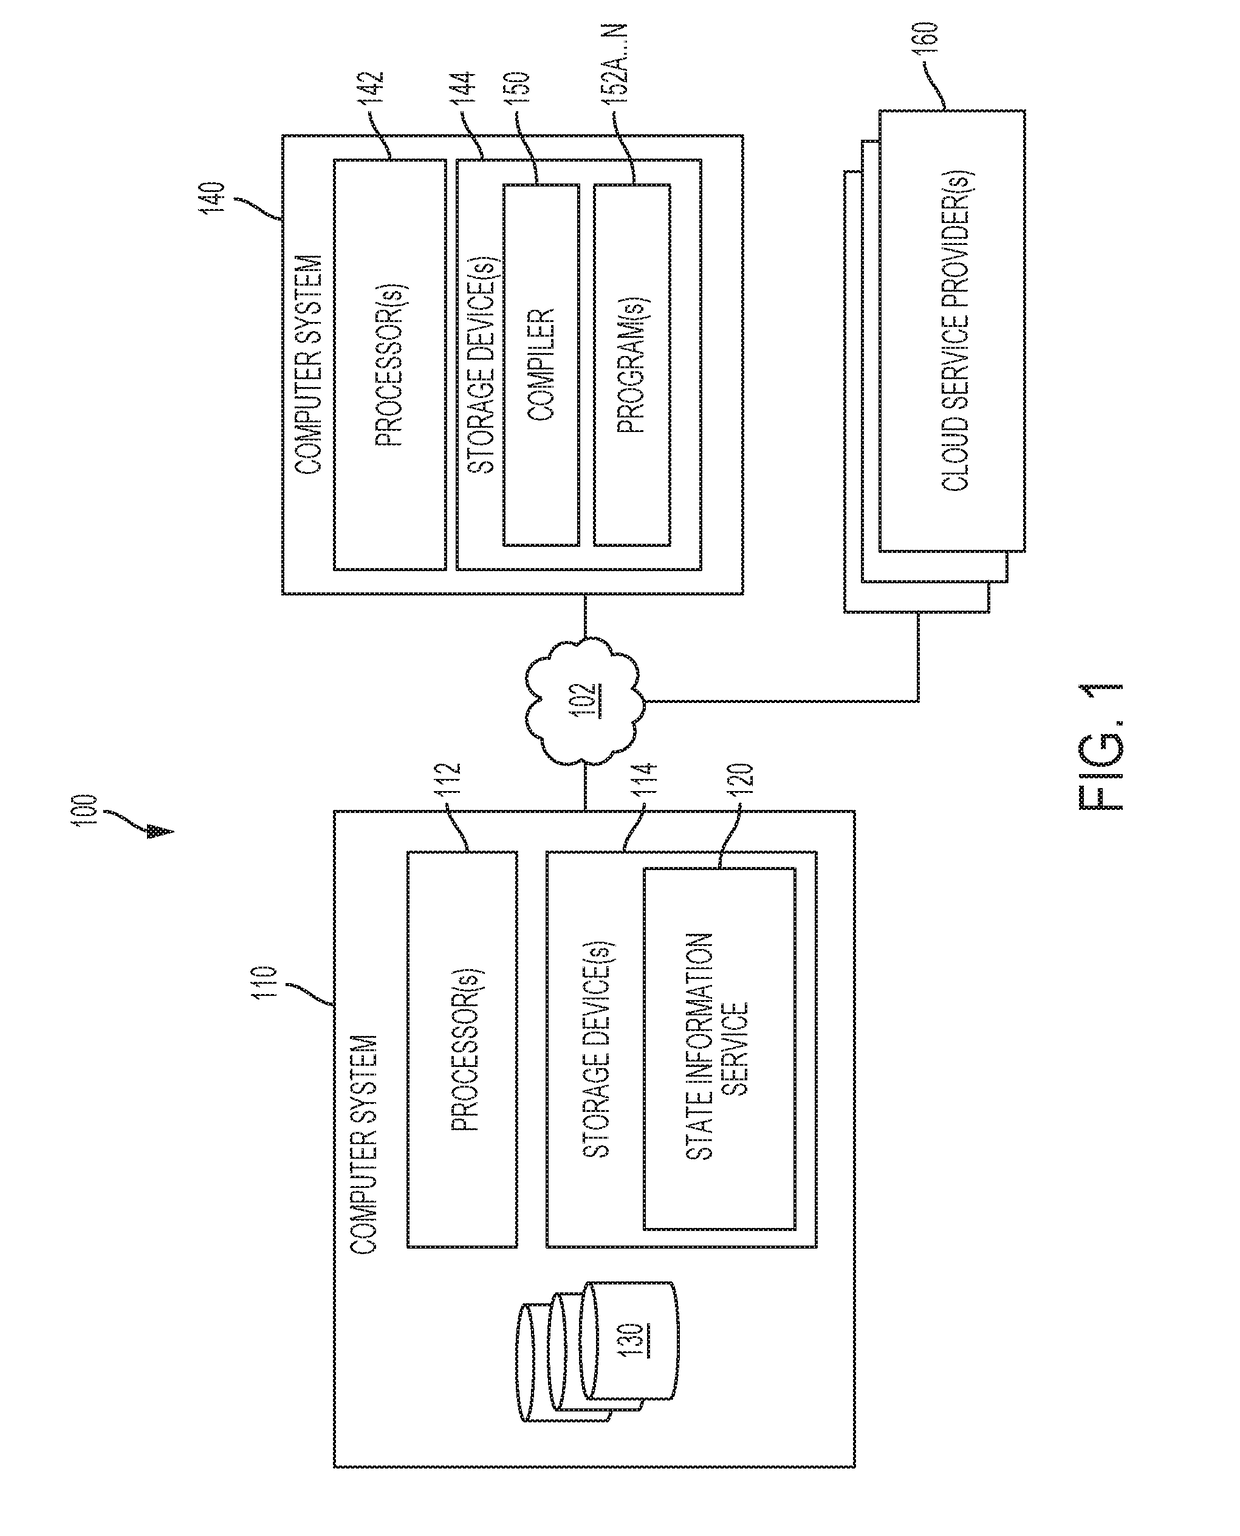 System and method for providing cloud operating system validations for a domain-specific language for cloud services infrastructure